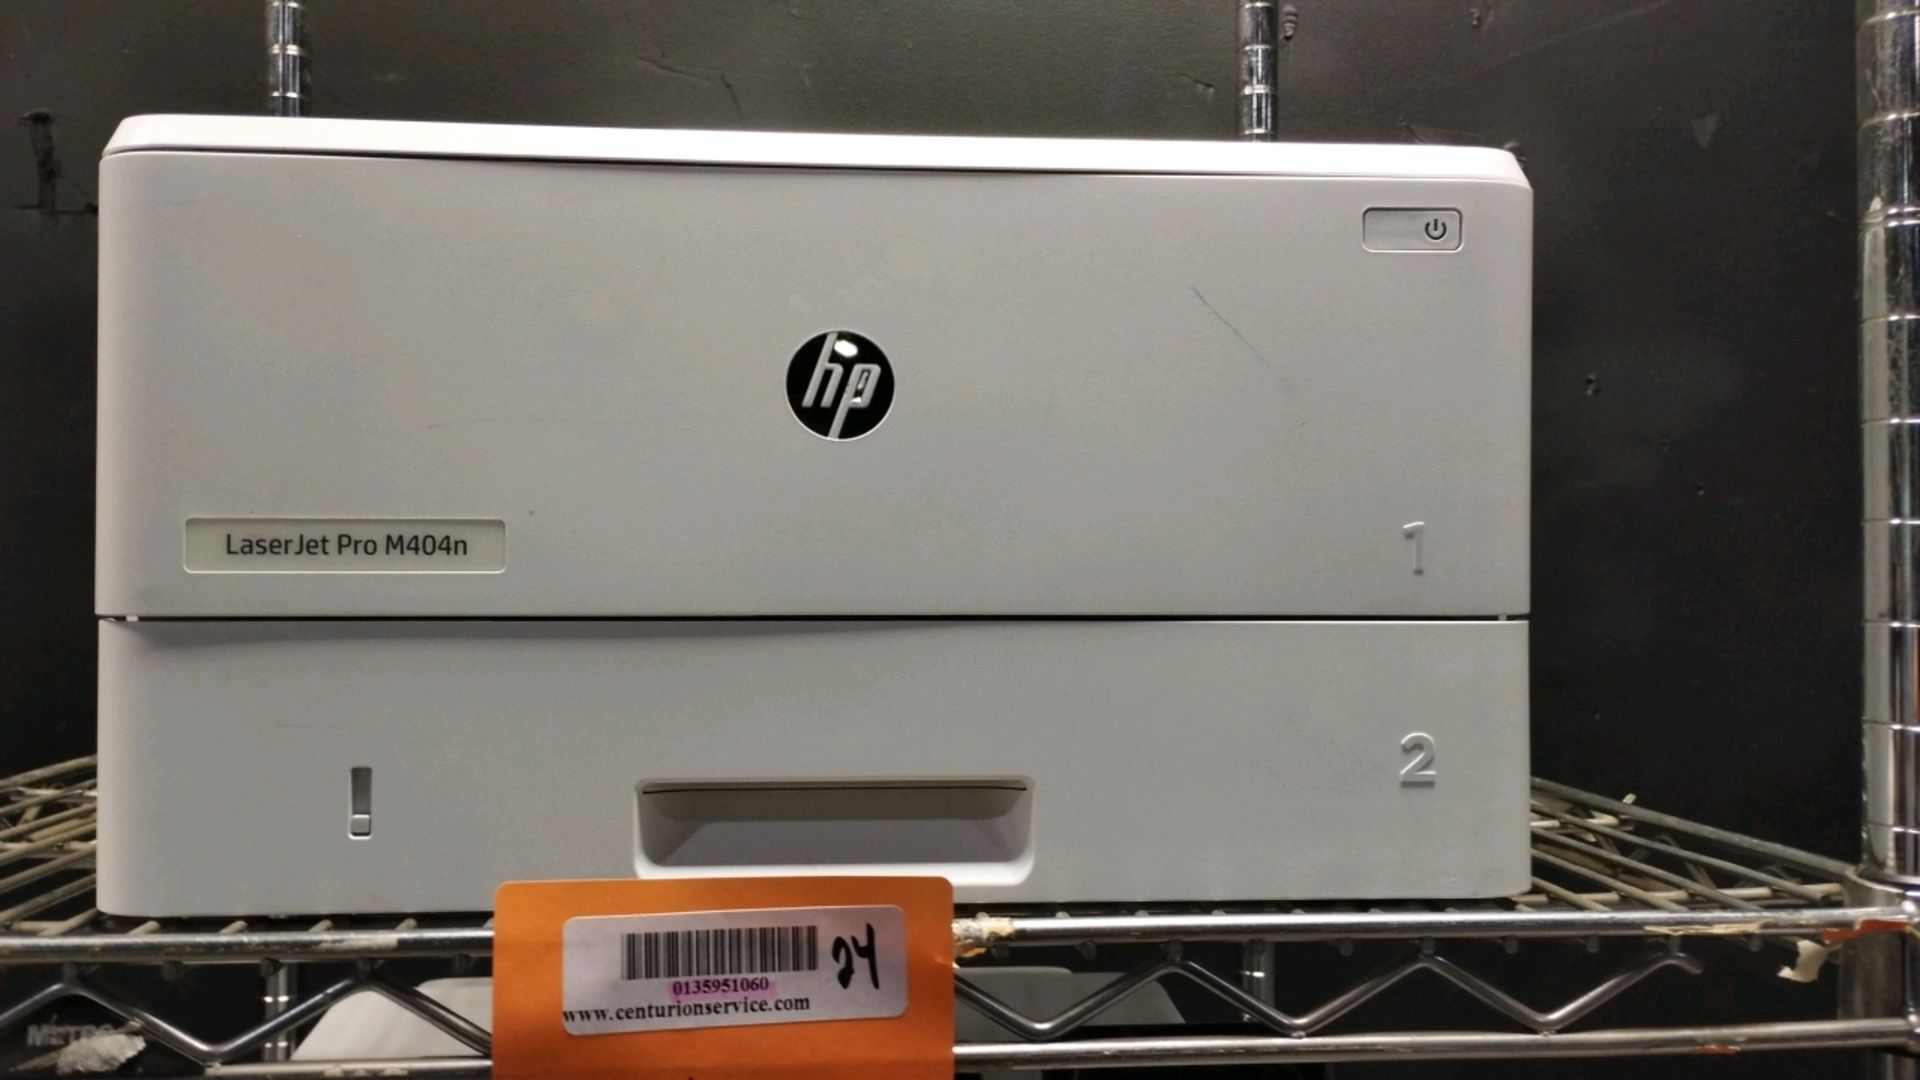 LOT OF SAMSUNG & HP PRINTERS (LOCATED AT 3325 MOUNT PROSPECT ROAD, FRANKLIN PARK, IL, 60131) - Image 2 of 4